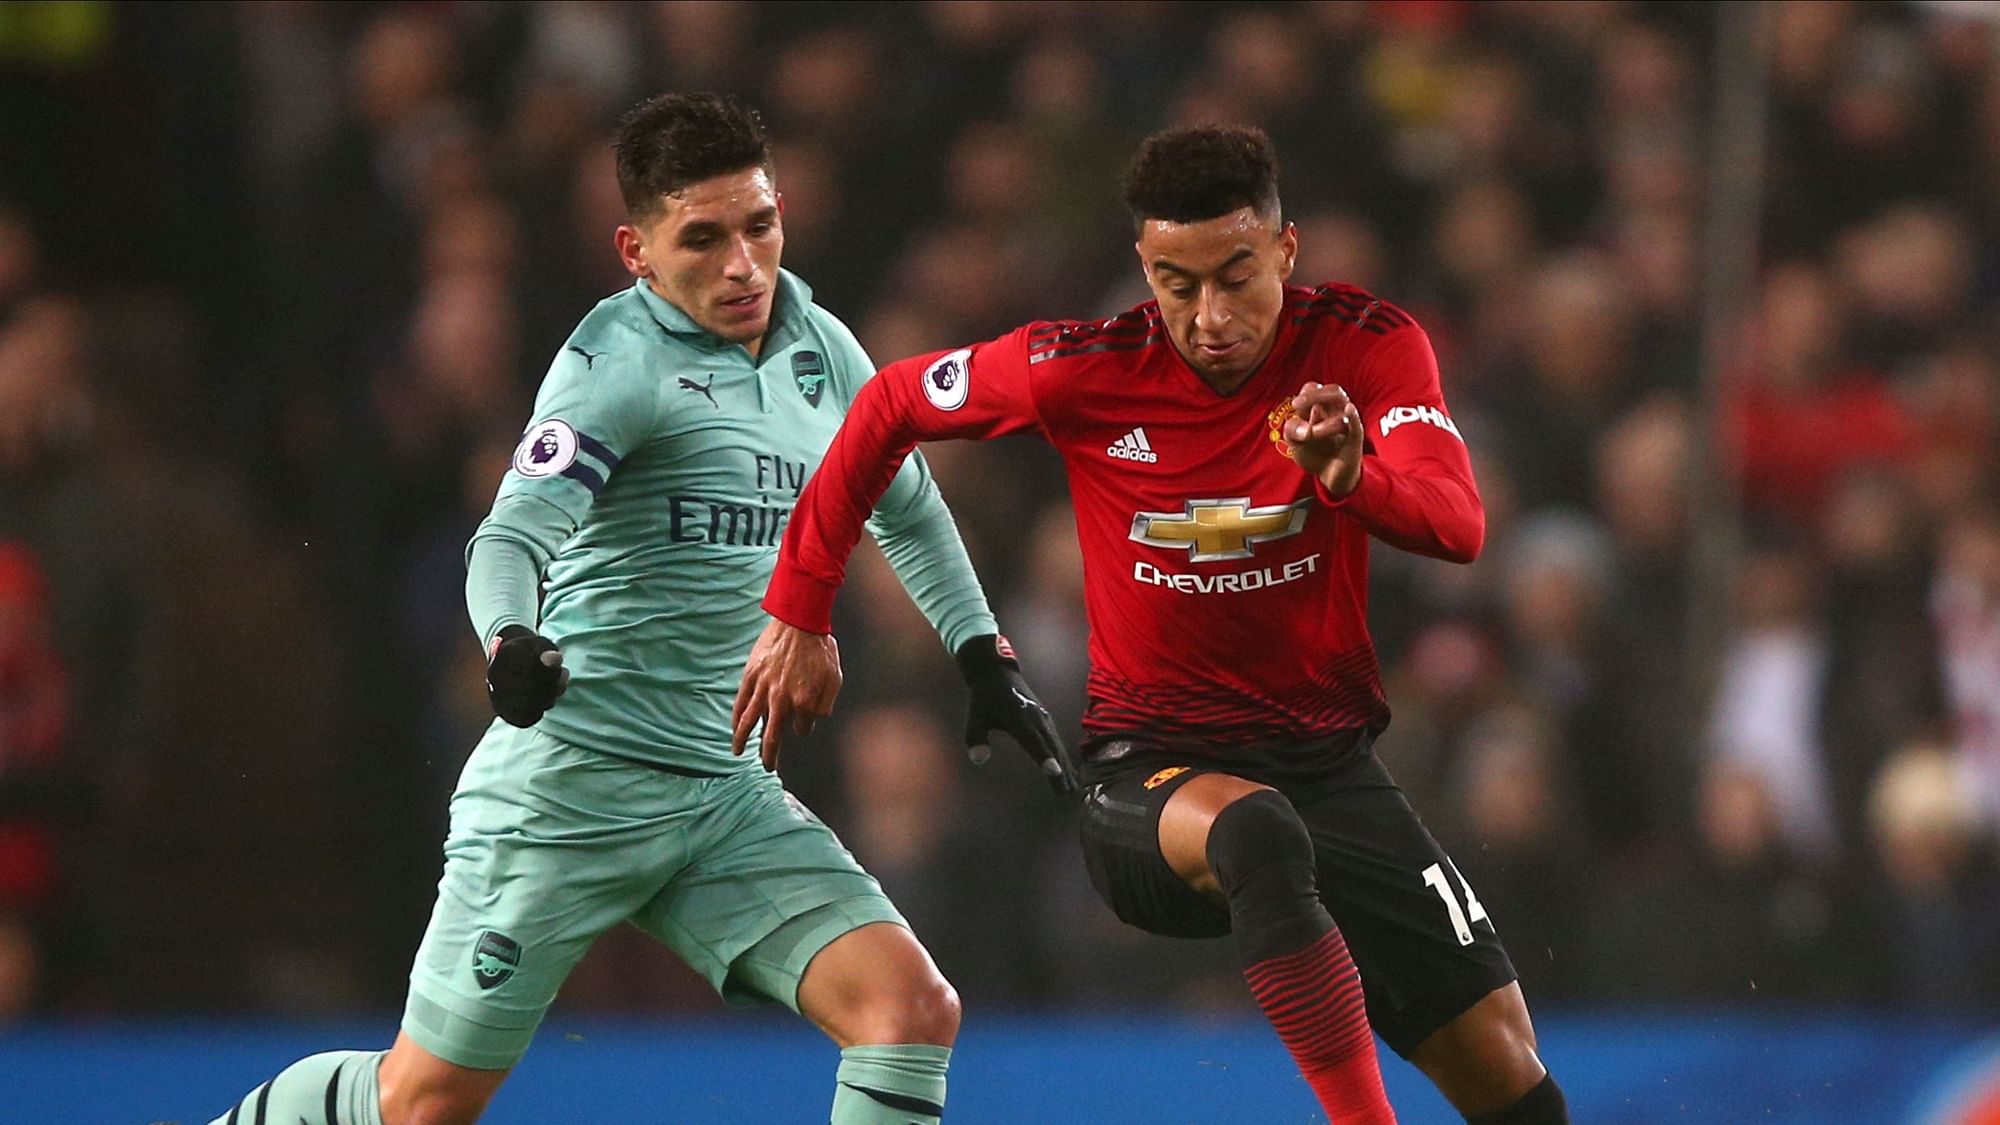 ManU midfielder Jesse Lingard, right, and Arsenal’s Lucas Torreira, left, vie for the ball during the English Premier League soccer match between Manchester United and Arsenal.